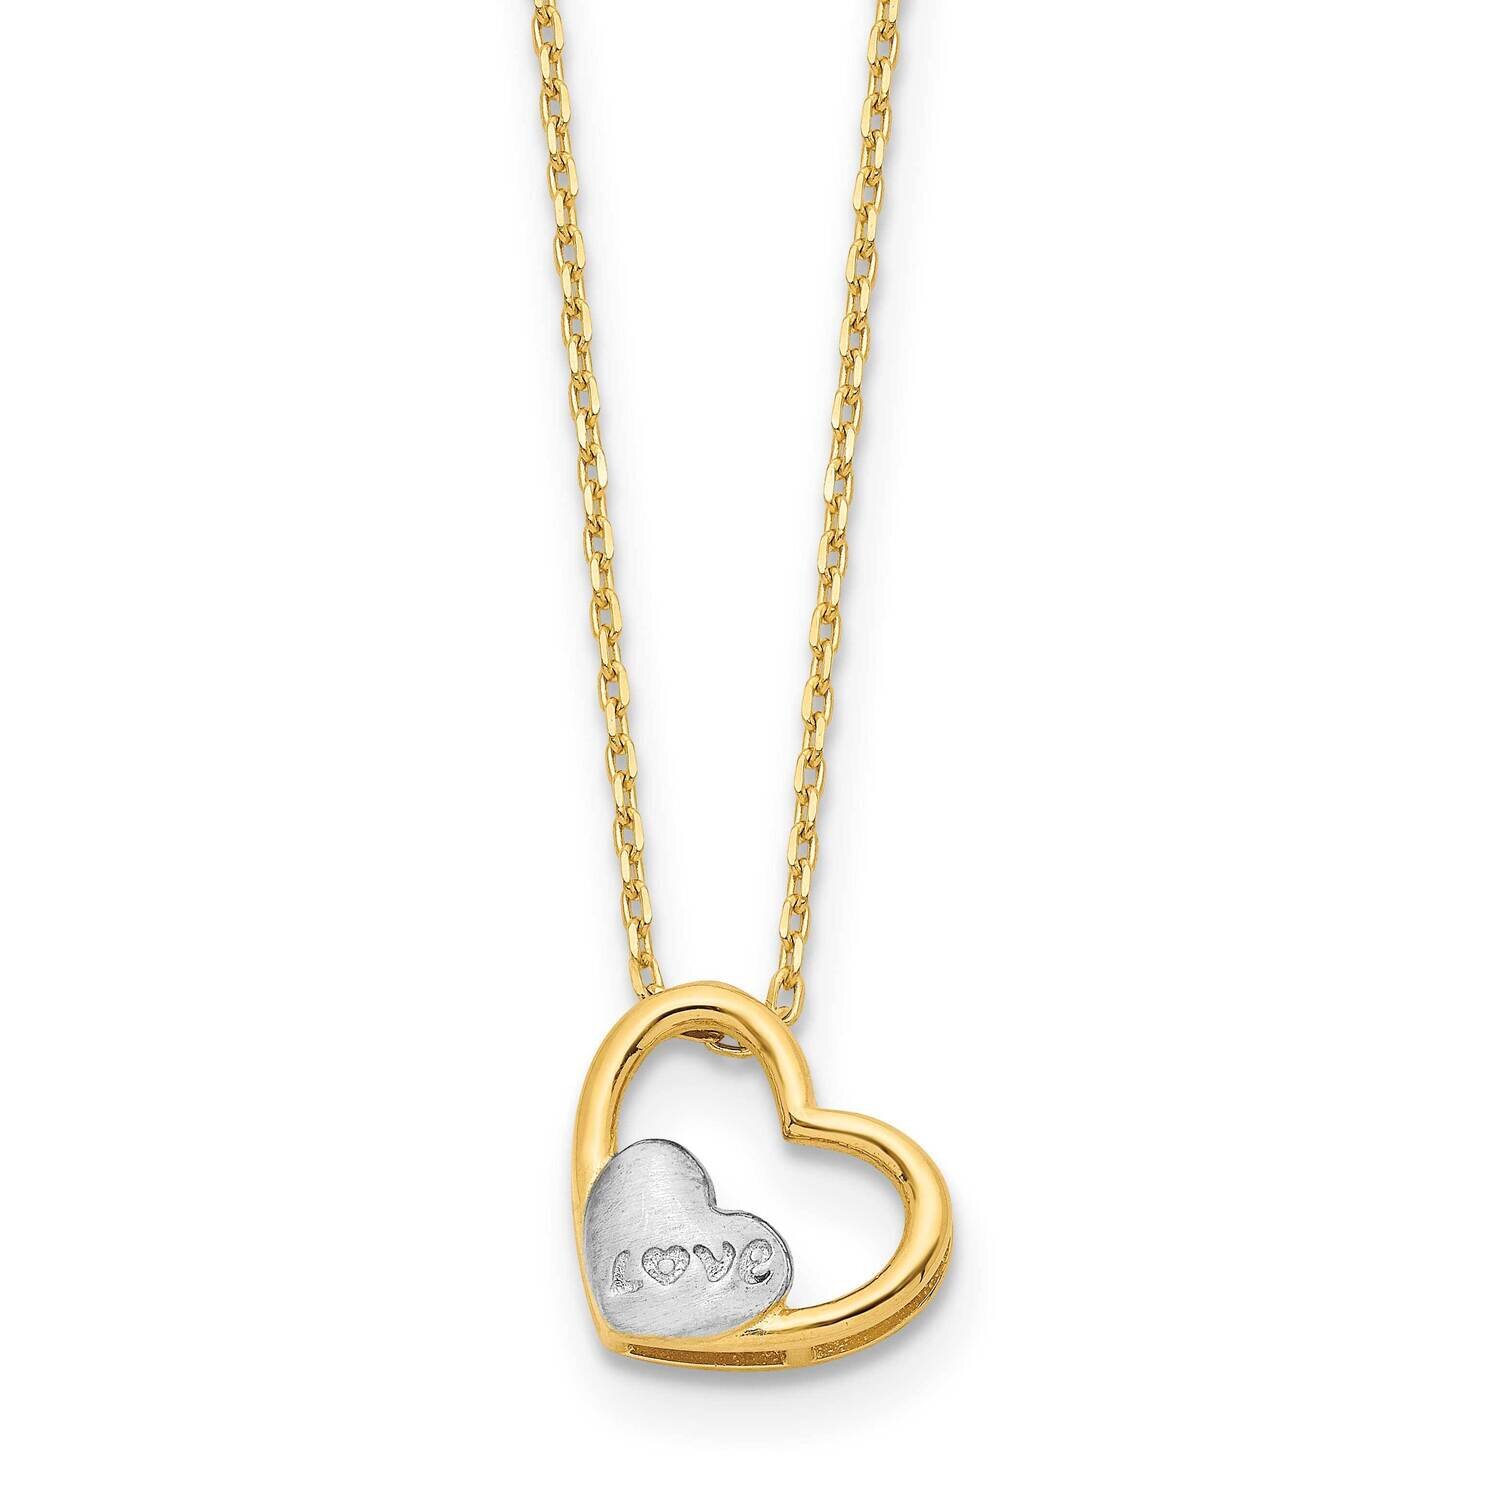 White Rhodium Brushed Polished Love Heart 17 Inch Necklace 14k Gold SF2875-17